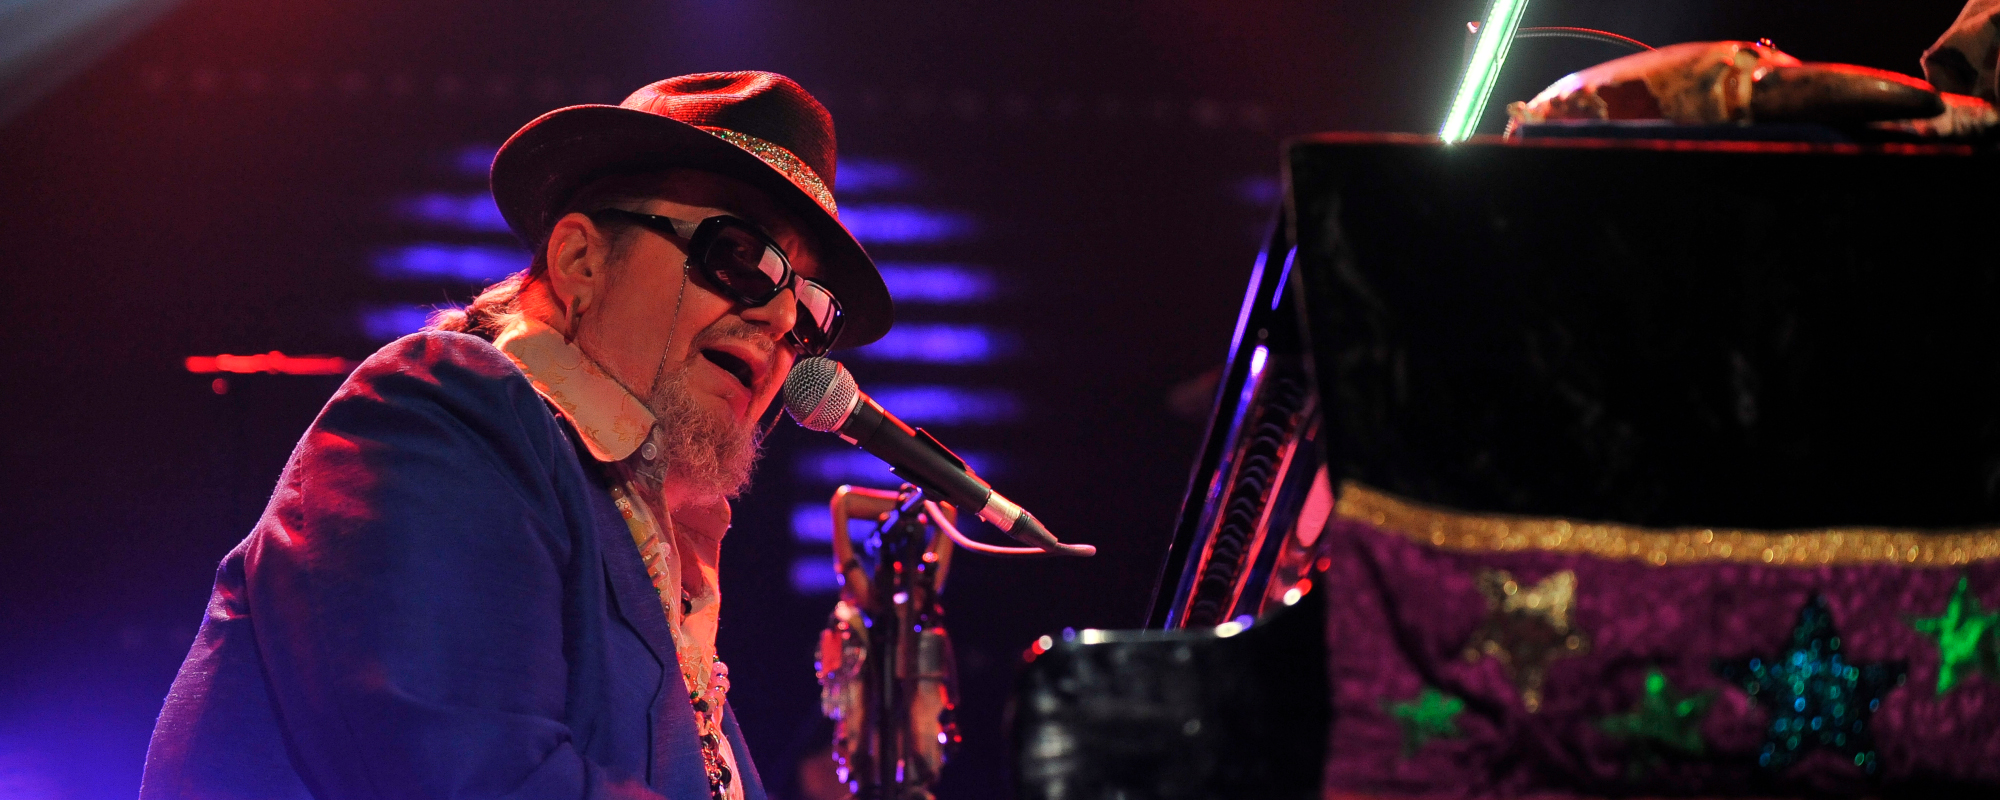 Review: Take This Prescription of Dr. John’s Finest Montreux Performances to Cure Your Ills